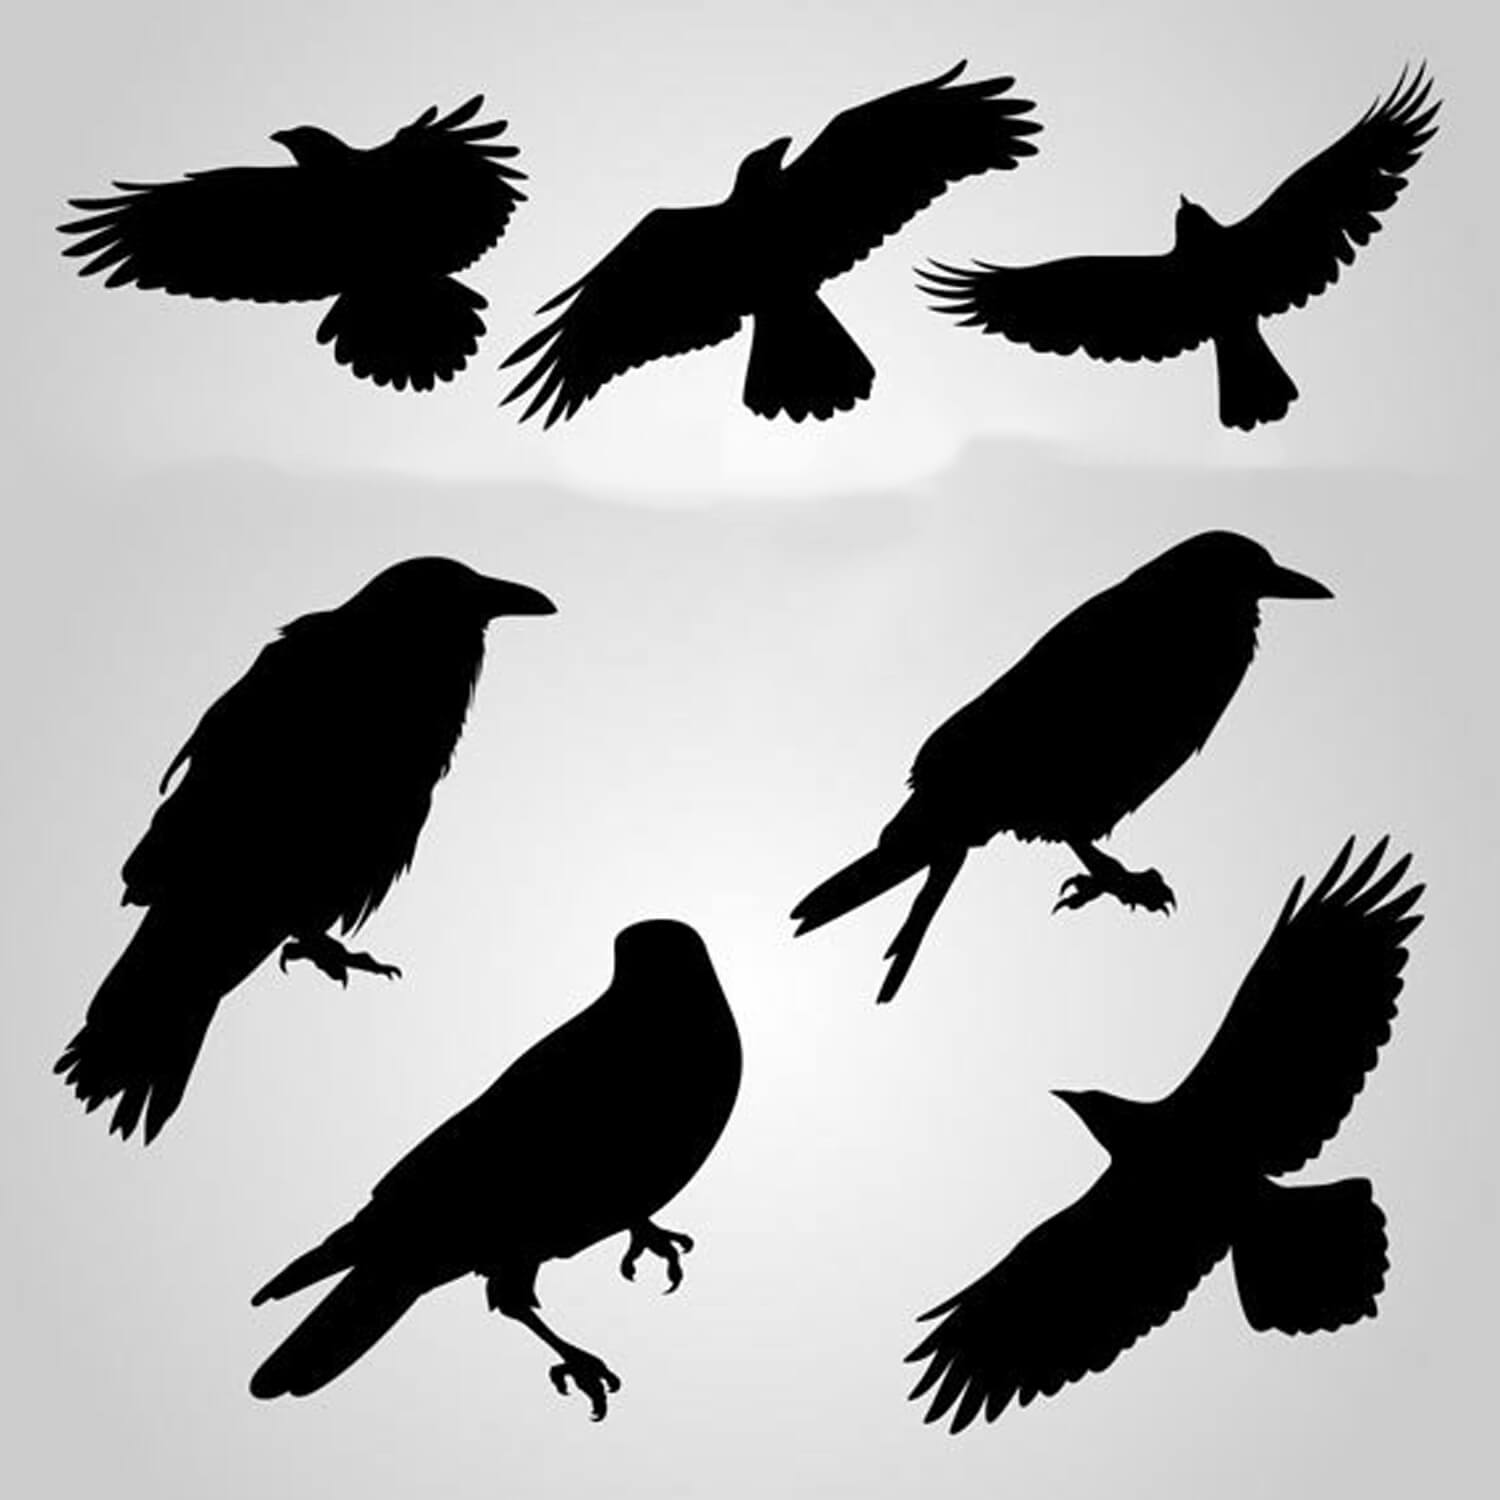 Silhouettes of birds with outstretched and folded wings.